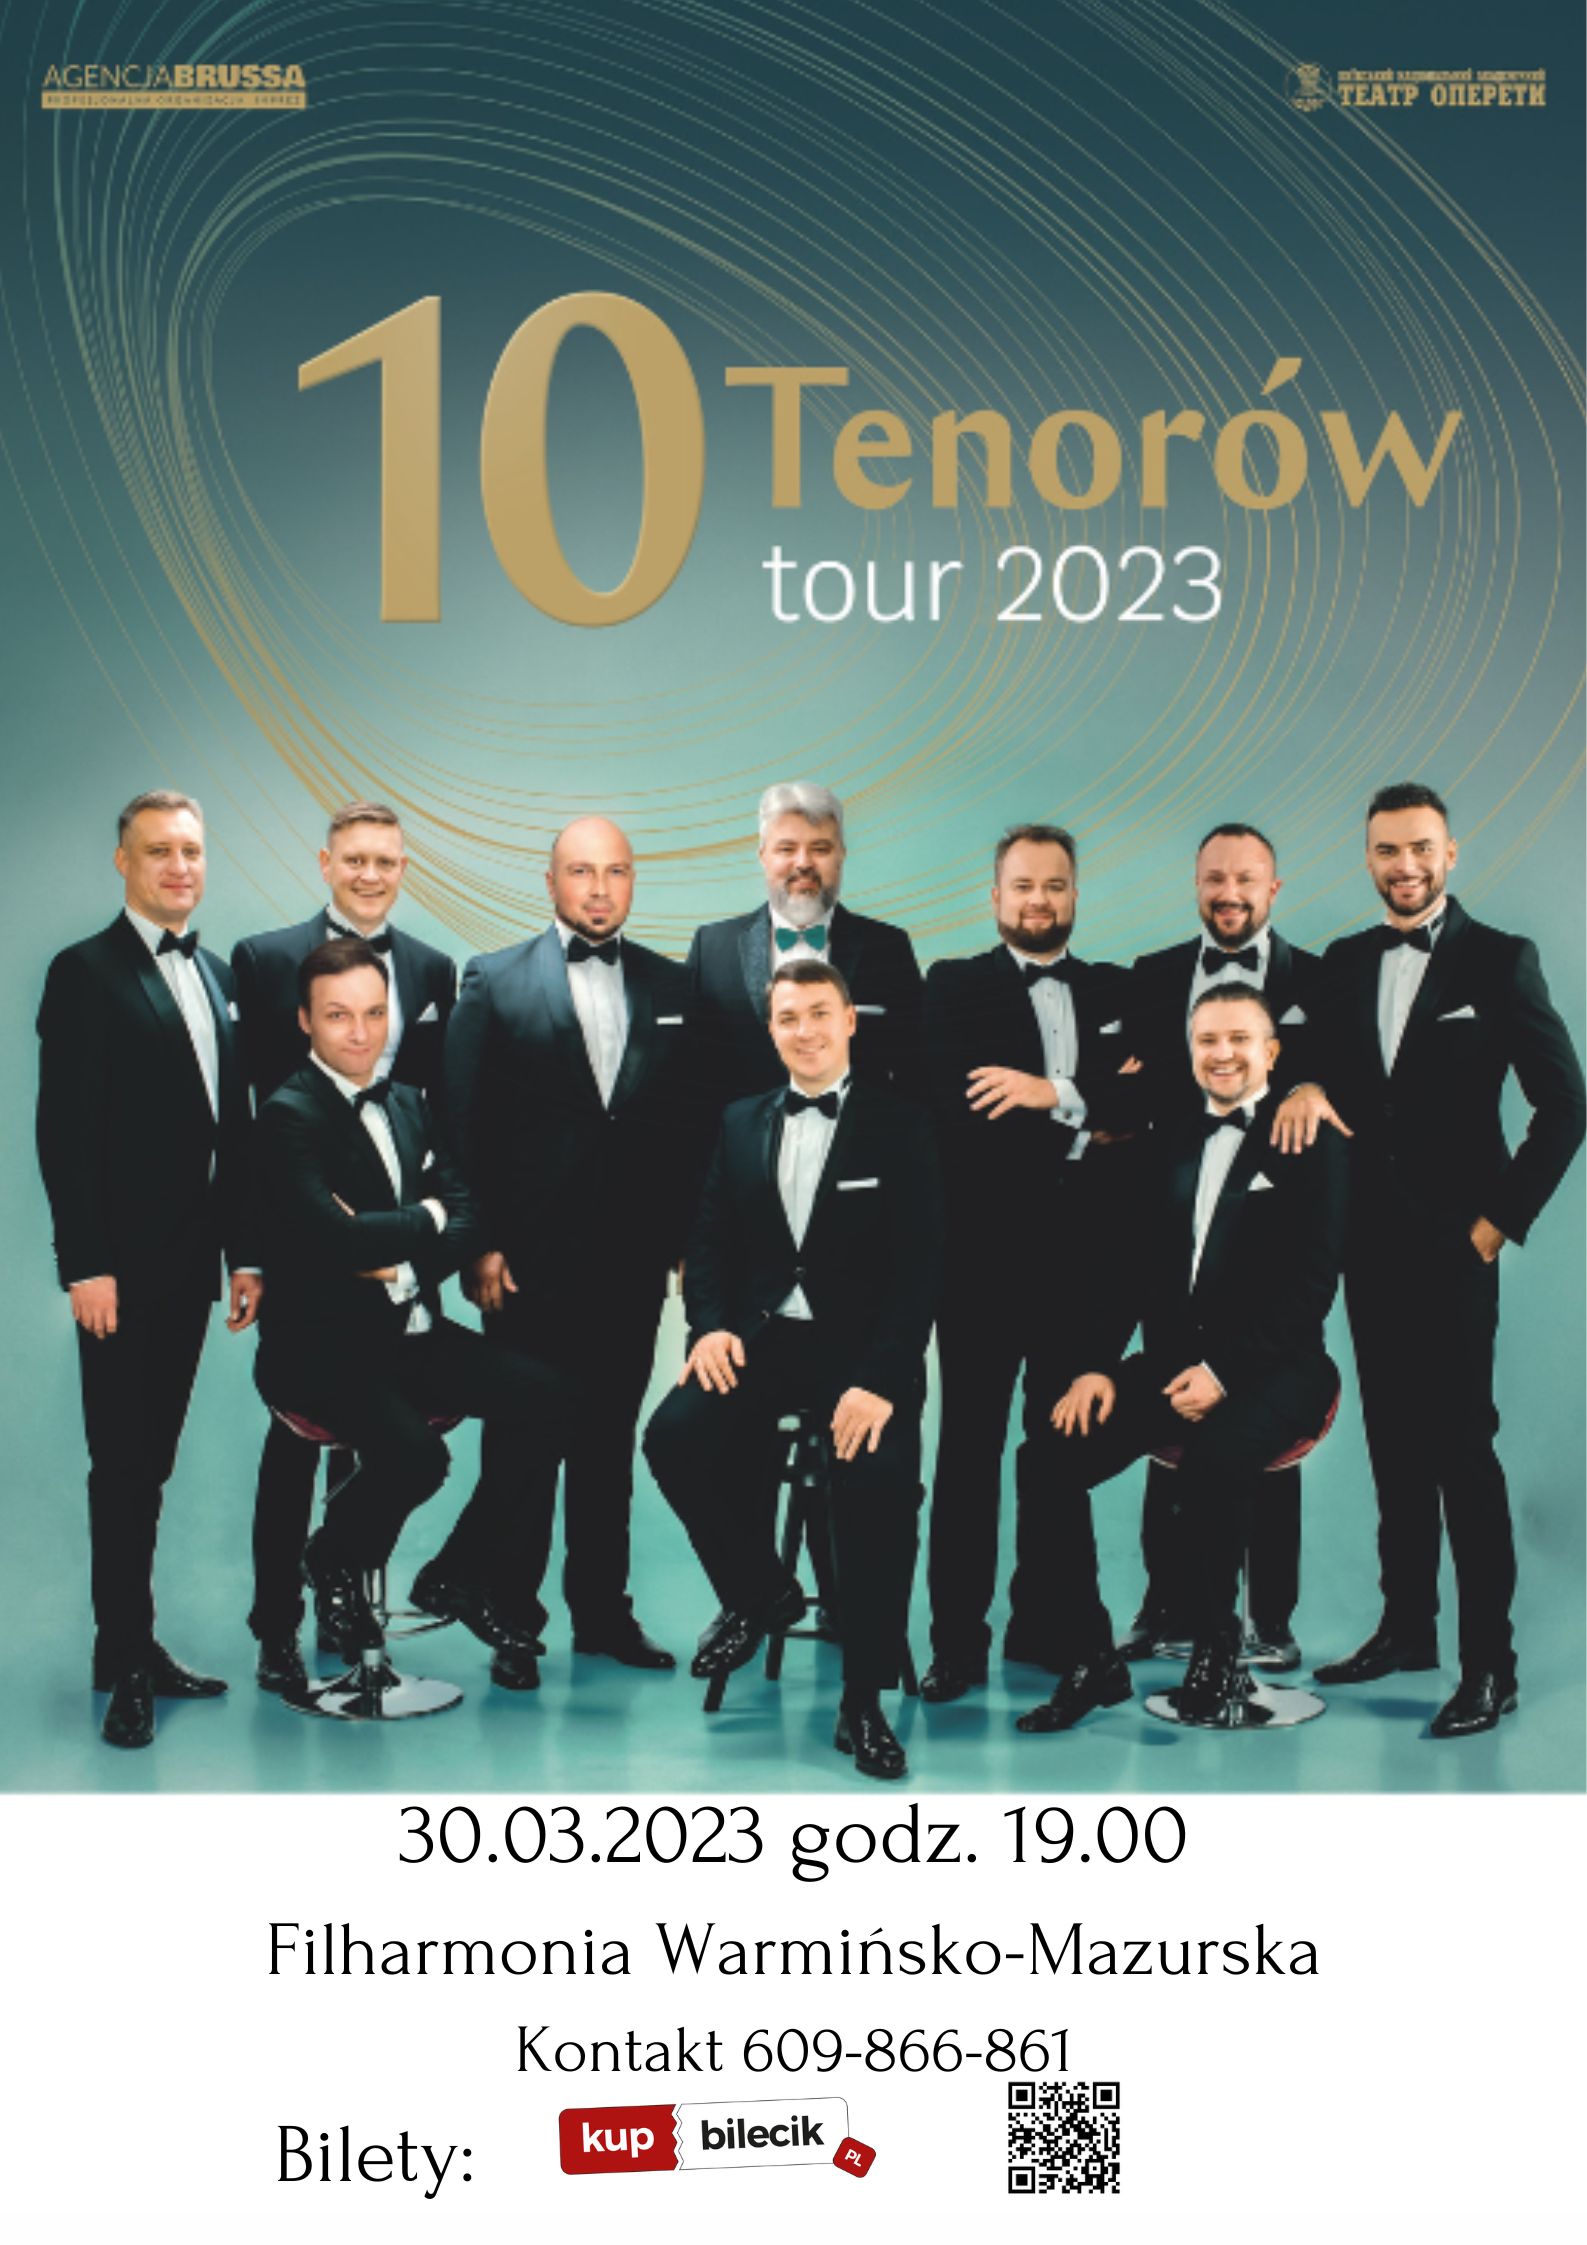 You are currently viewing 10 Tenorów tour 2023